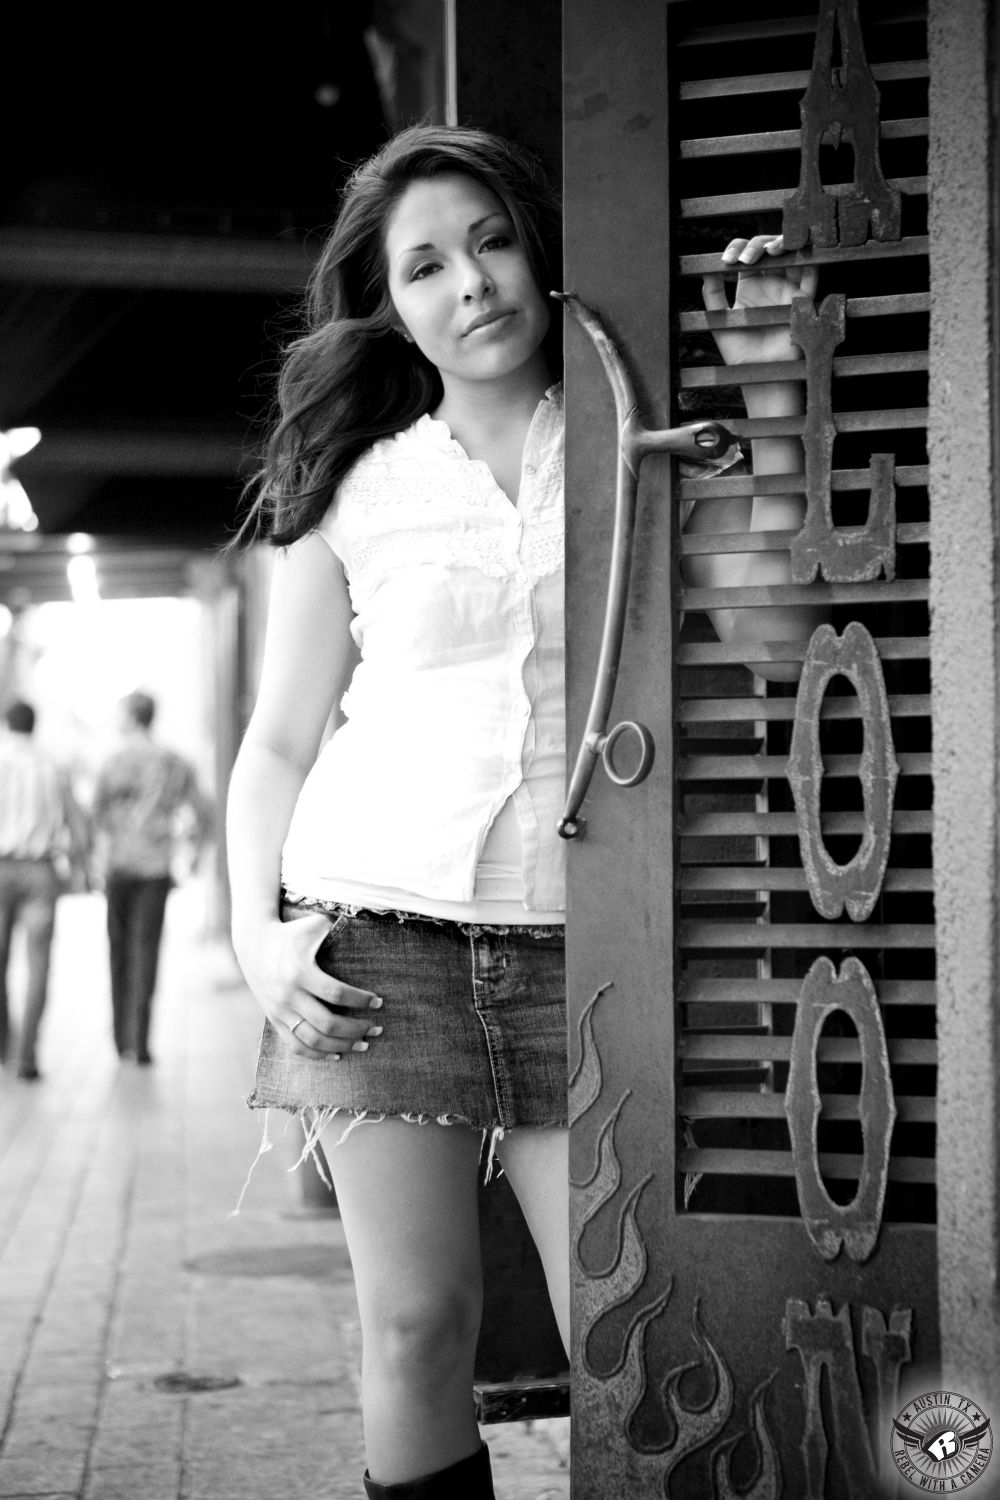 Downtown Austin high school senior portraits of girl in shorts and boots with hair and makeup by Divaz Fabula.